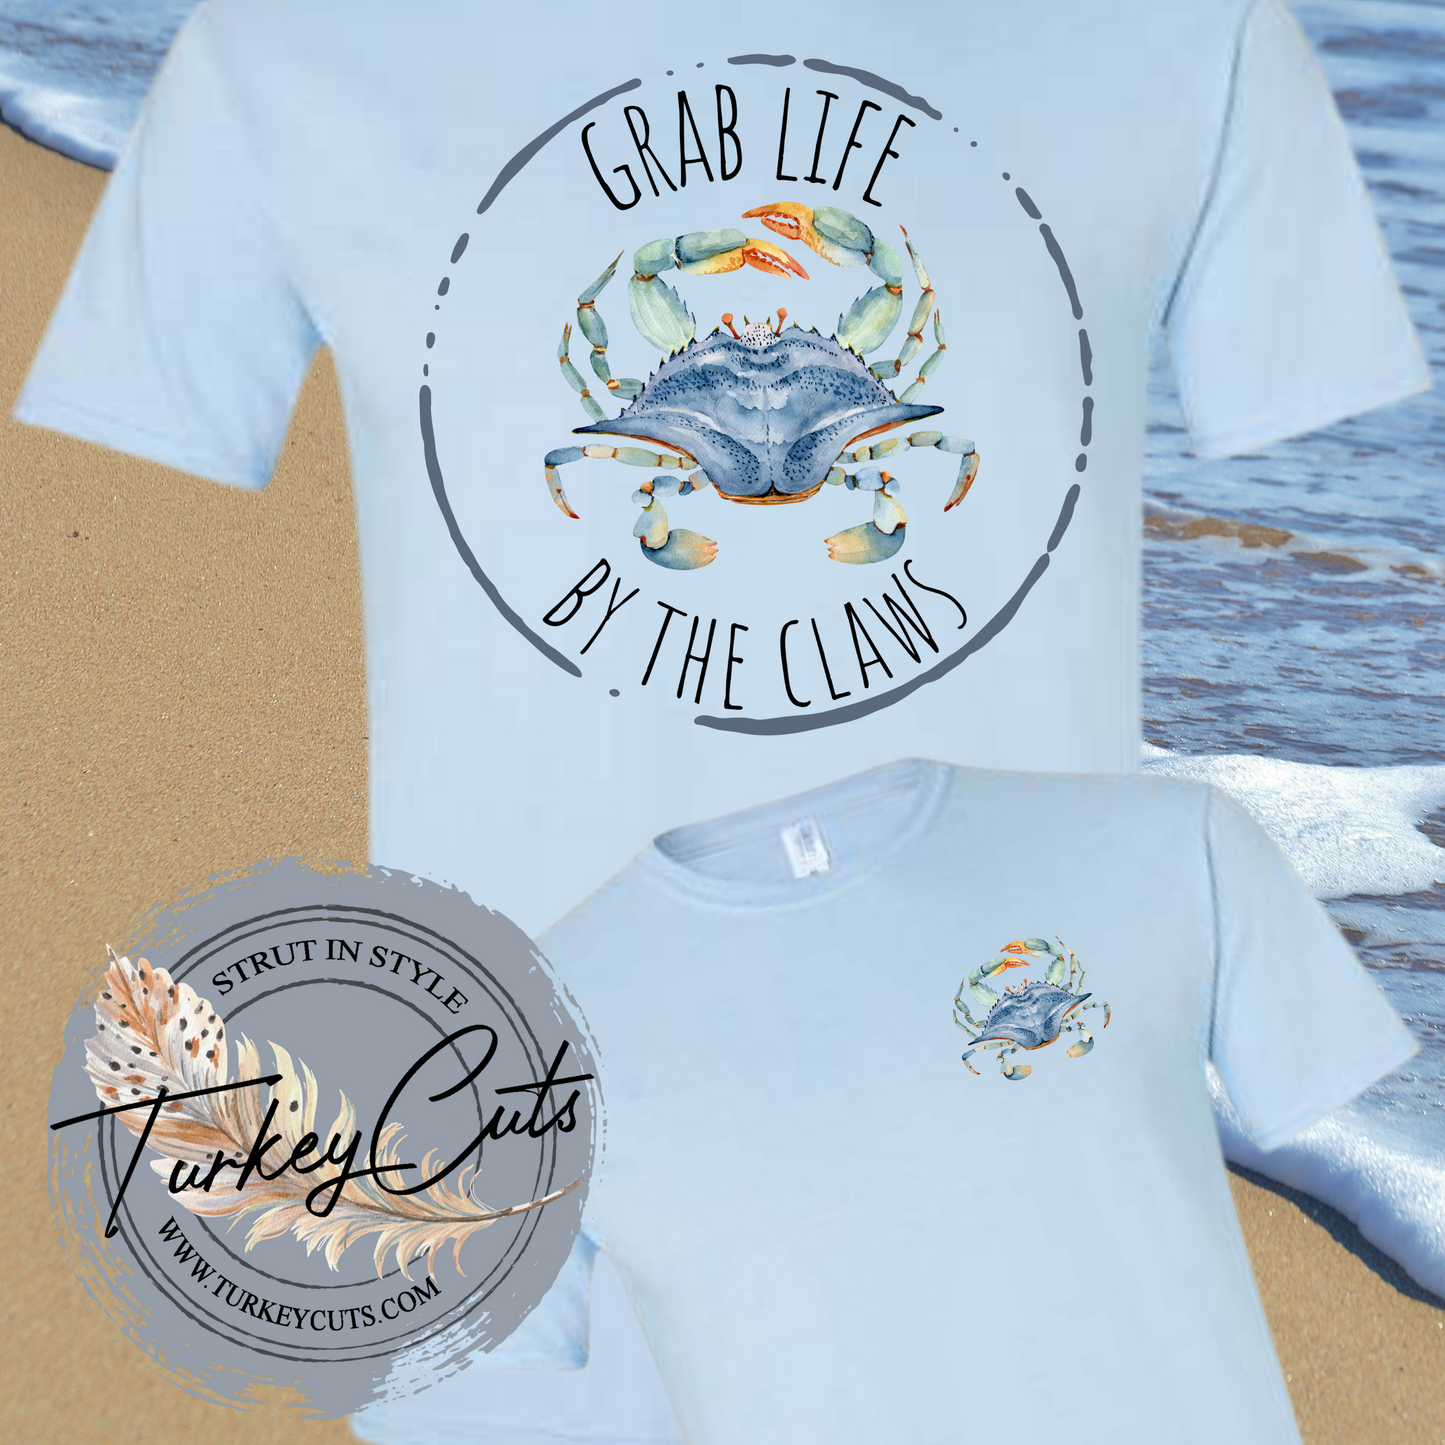 Grab Life By The Claws Tee!!
- Youth